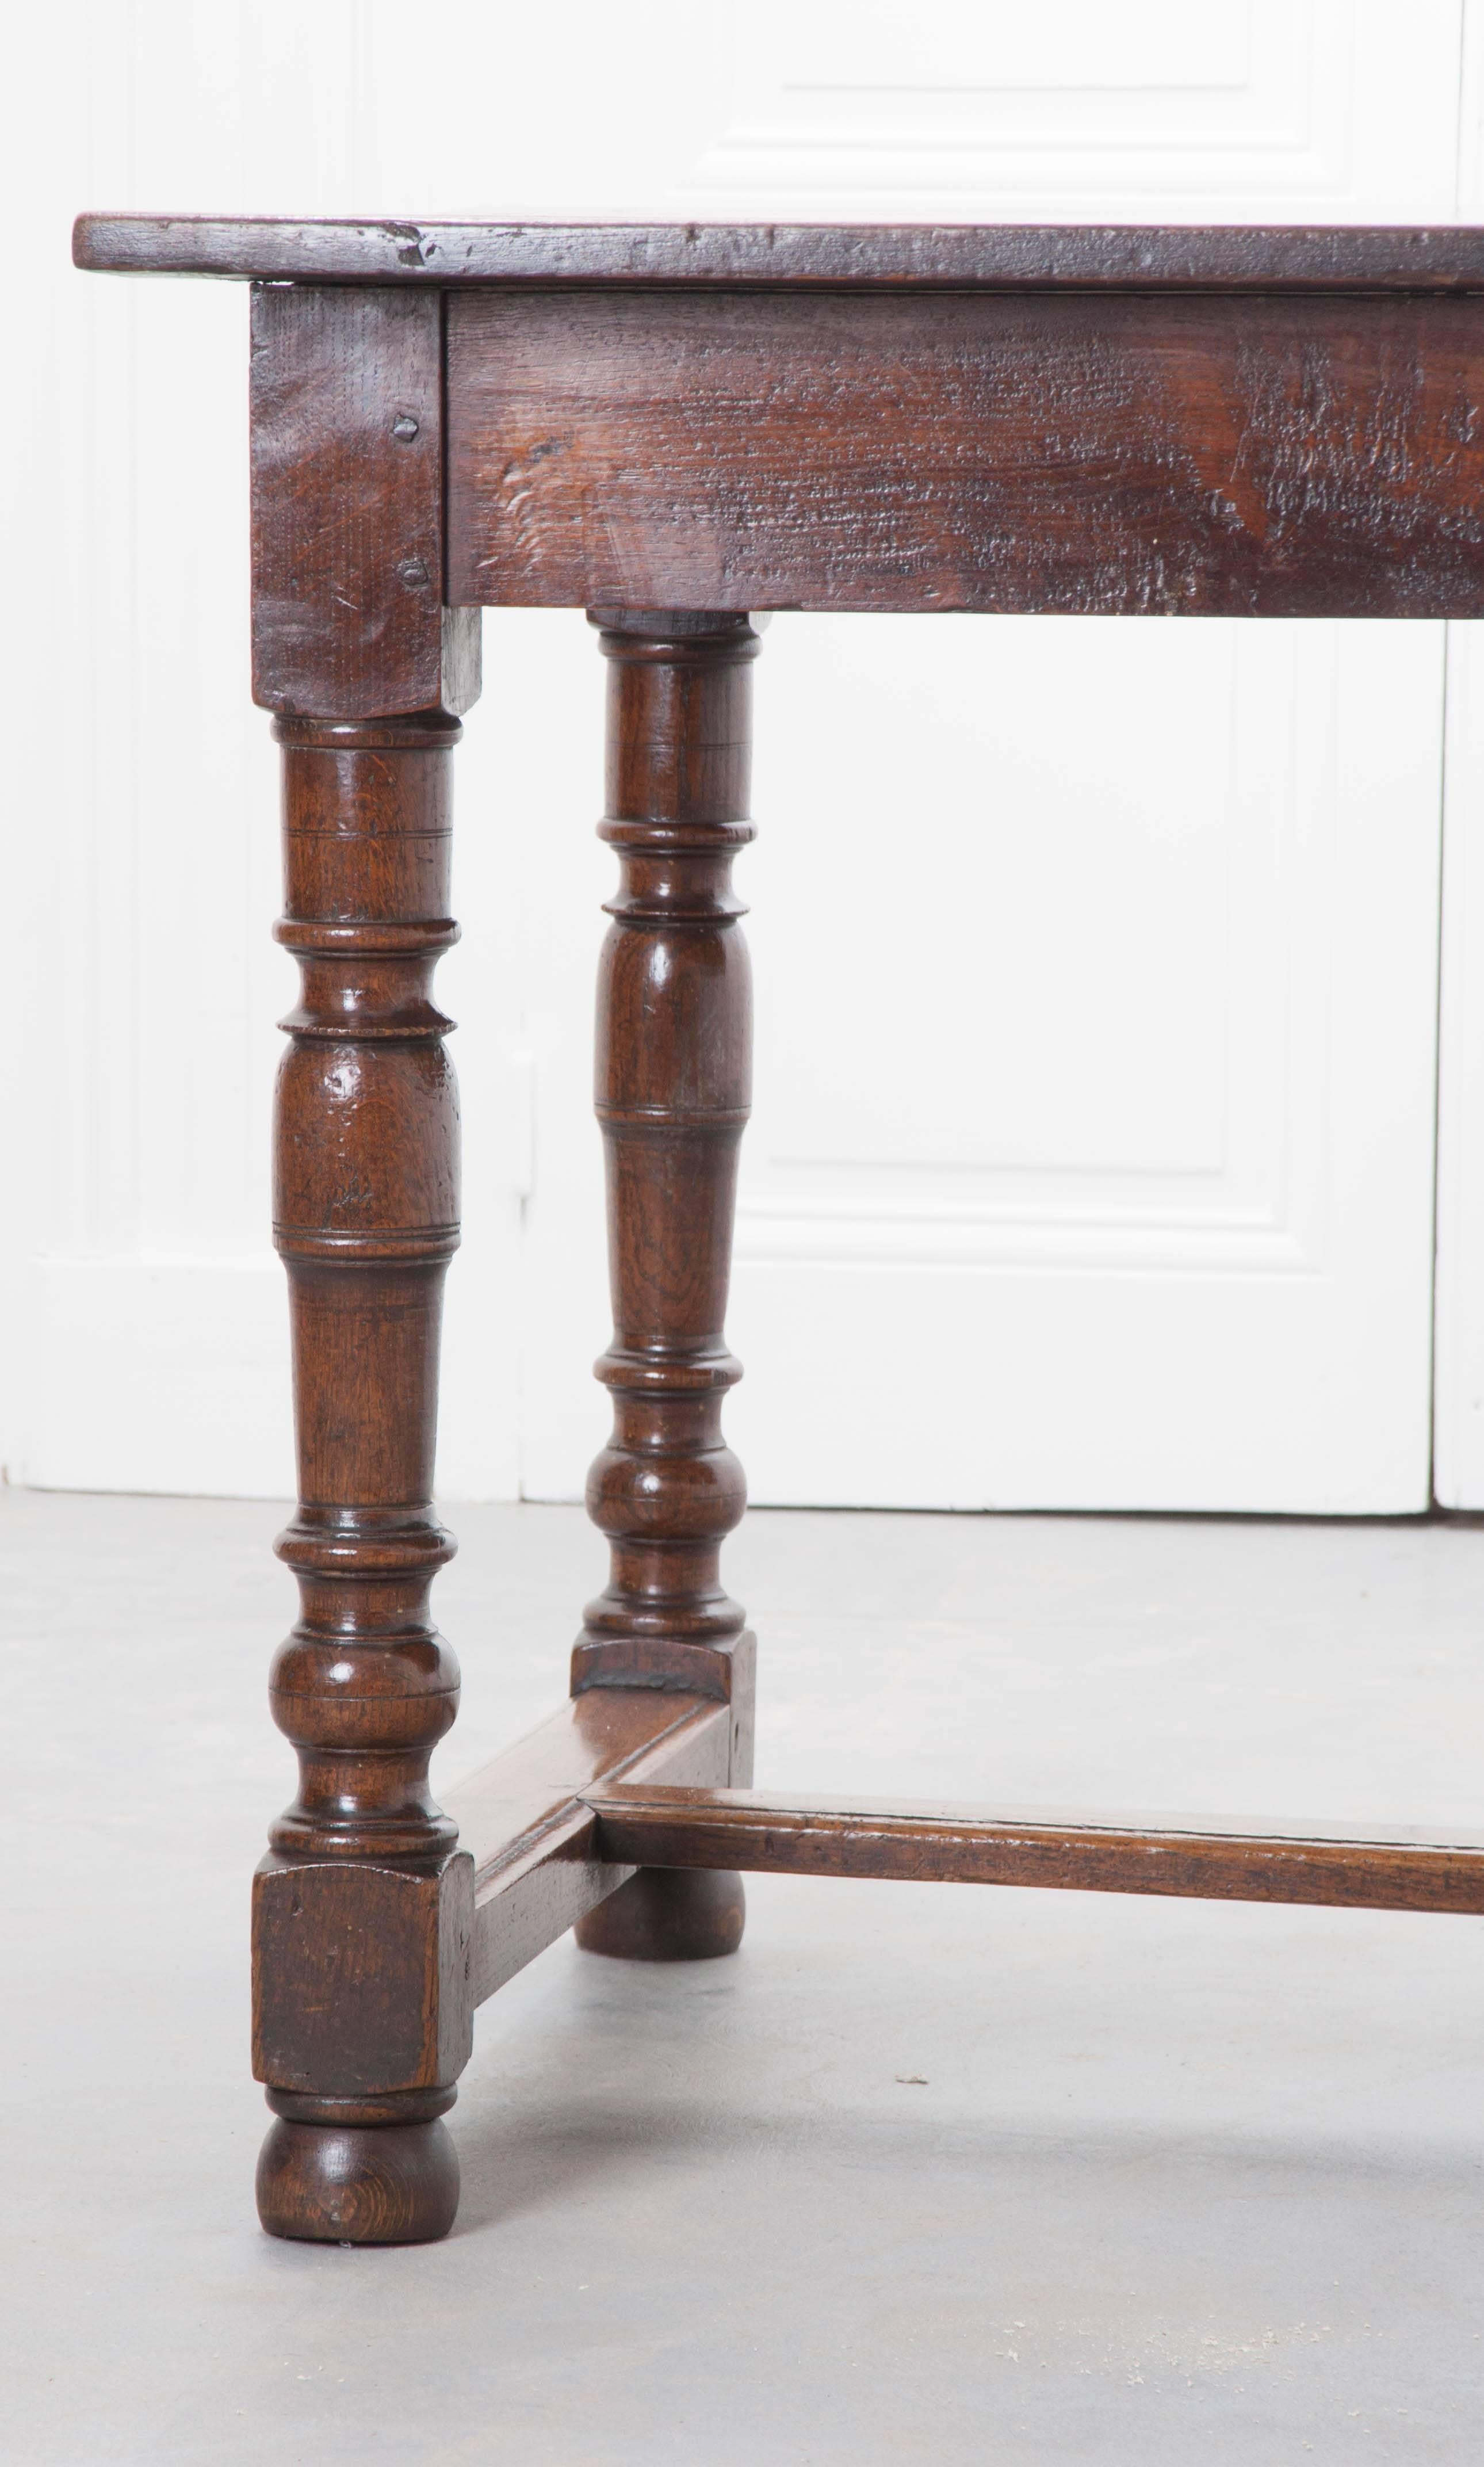 A remarkable oak farmhouse table from early 19th century, France. This beautiful table has been used and loved for close to two hundred years, imparting a patina that you will only find with French waxed antiques. The oak boards that form the